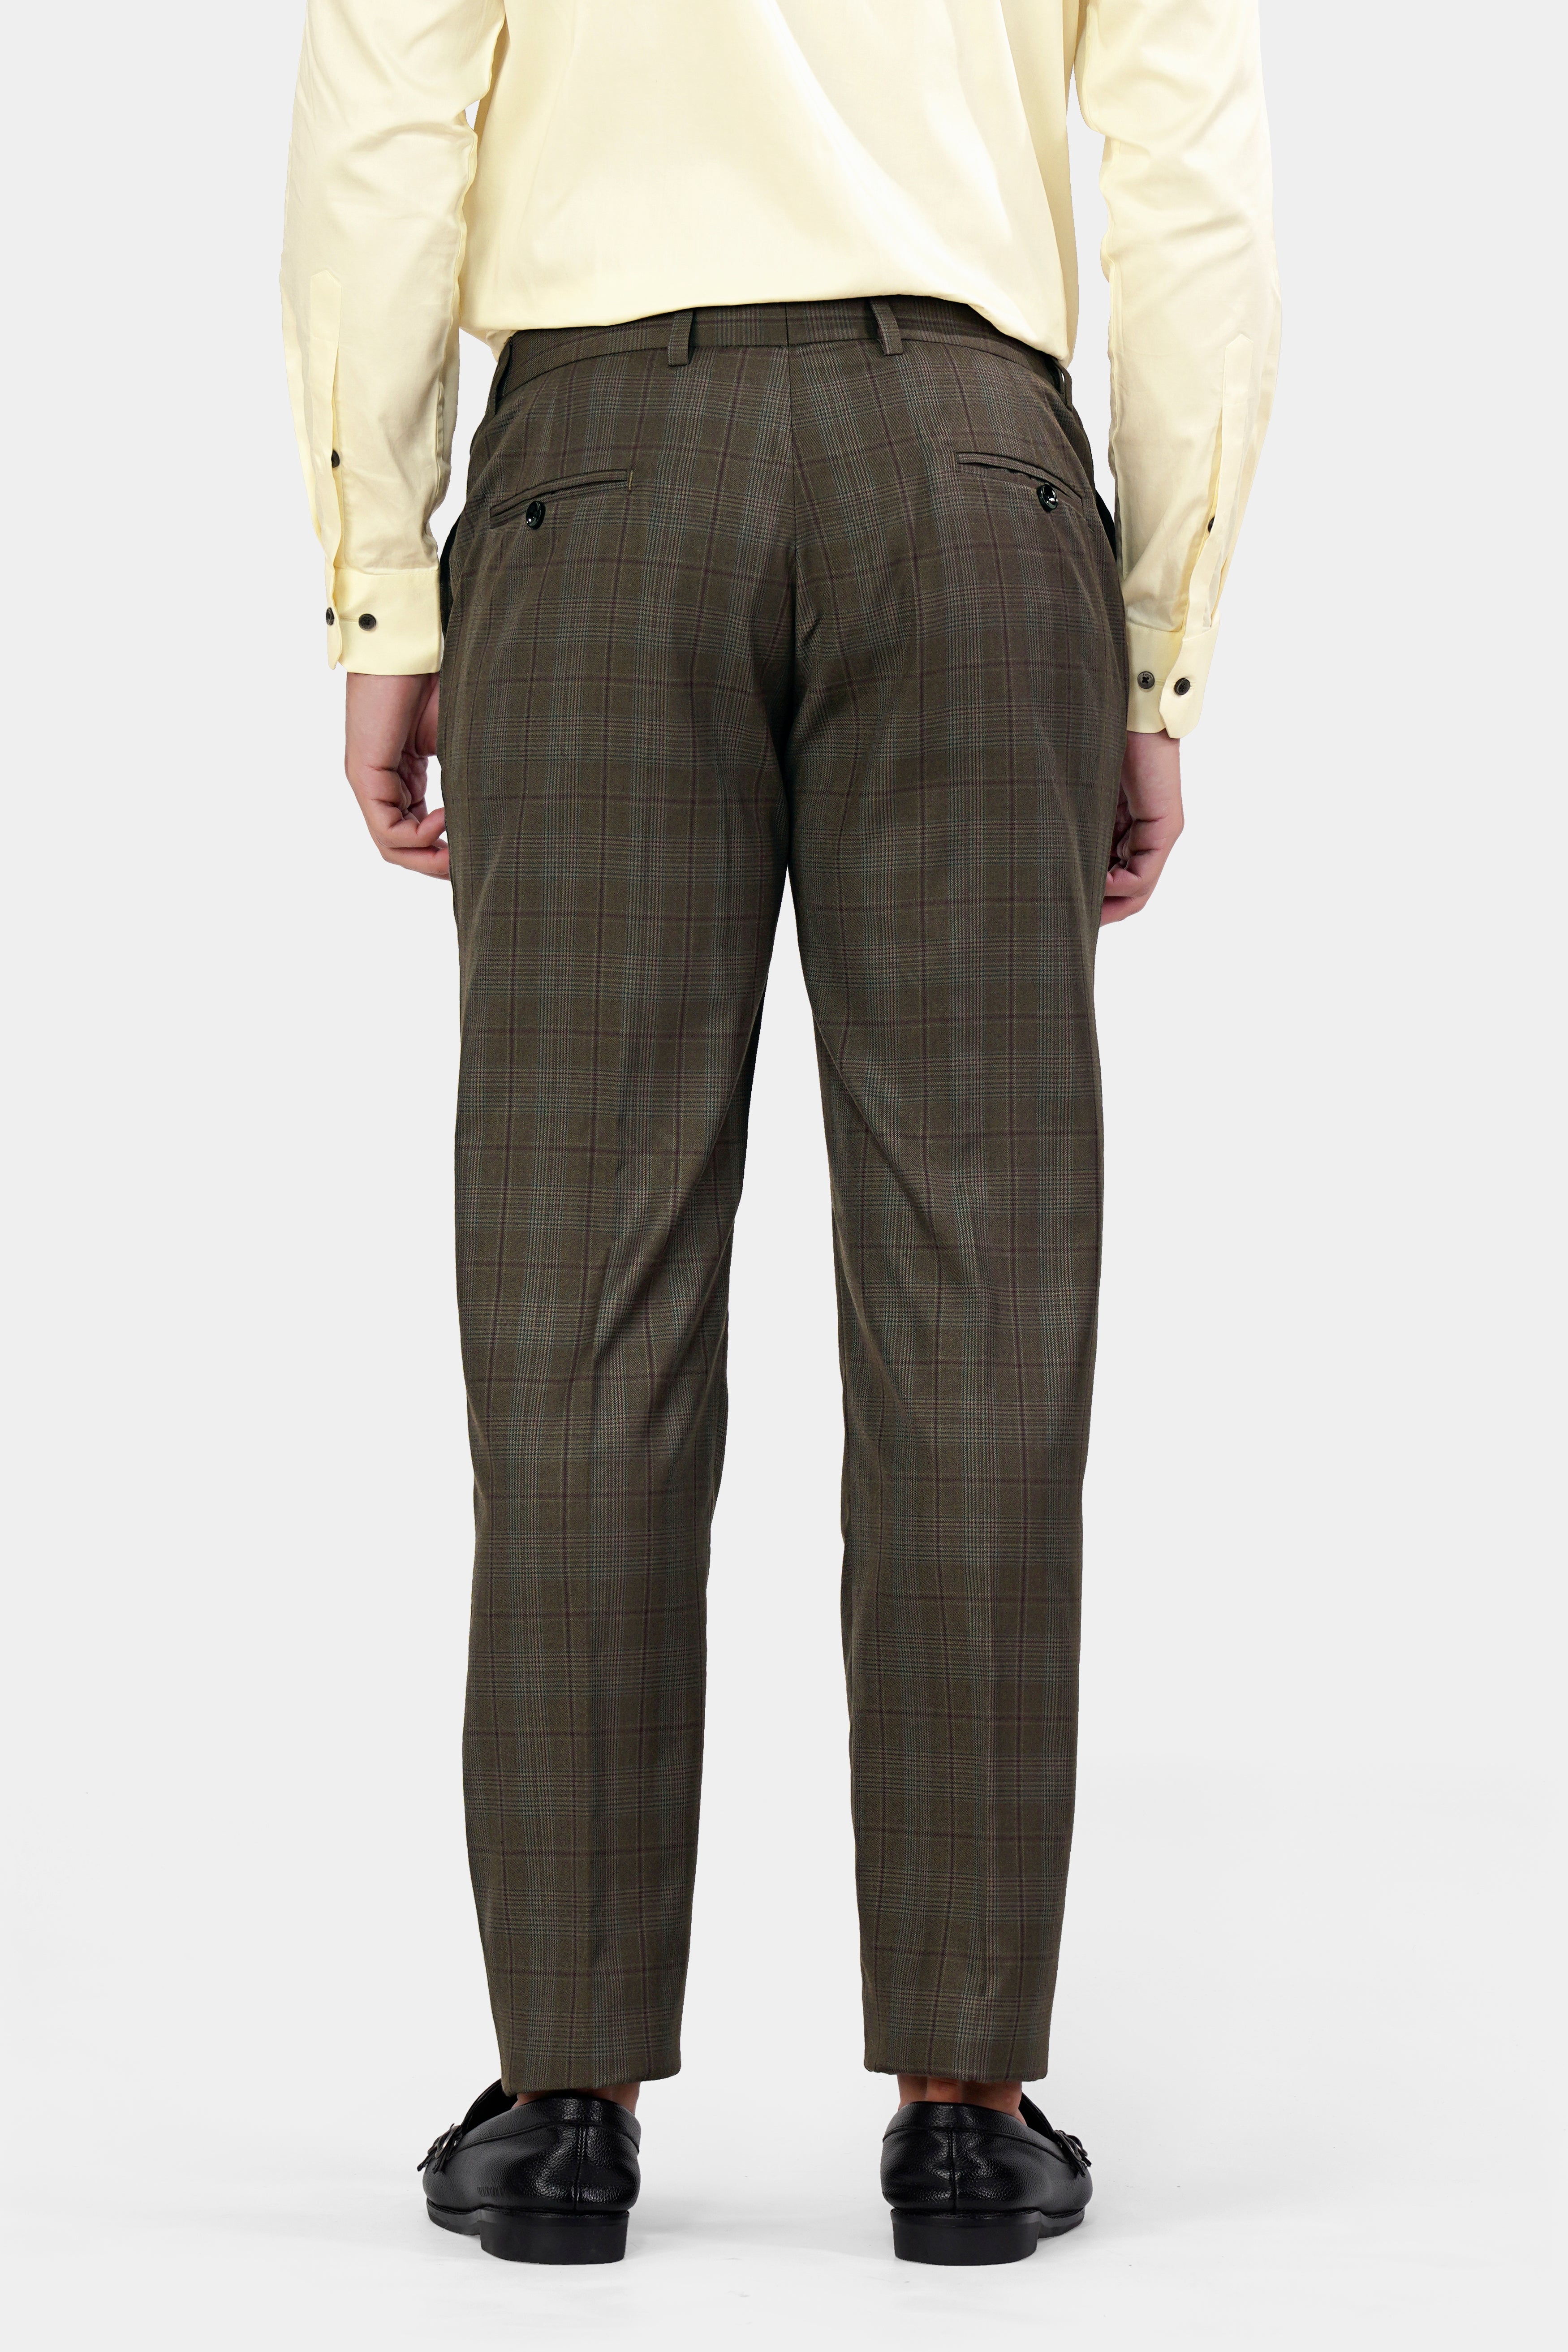 Fuscous Green and Bistre Brown Plaid Wool Rich Stretchable Pant T2951-SW-28, T2951-SW-30, T2951-SW-32, T2951-SW-34, T2951-SW-36, T2951-SW-38, T2951-SW-40, T2951-SW-42, T2951-SW-44 